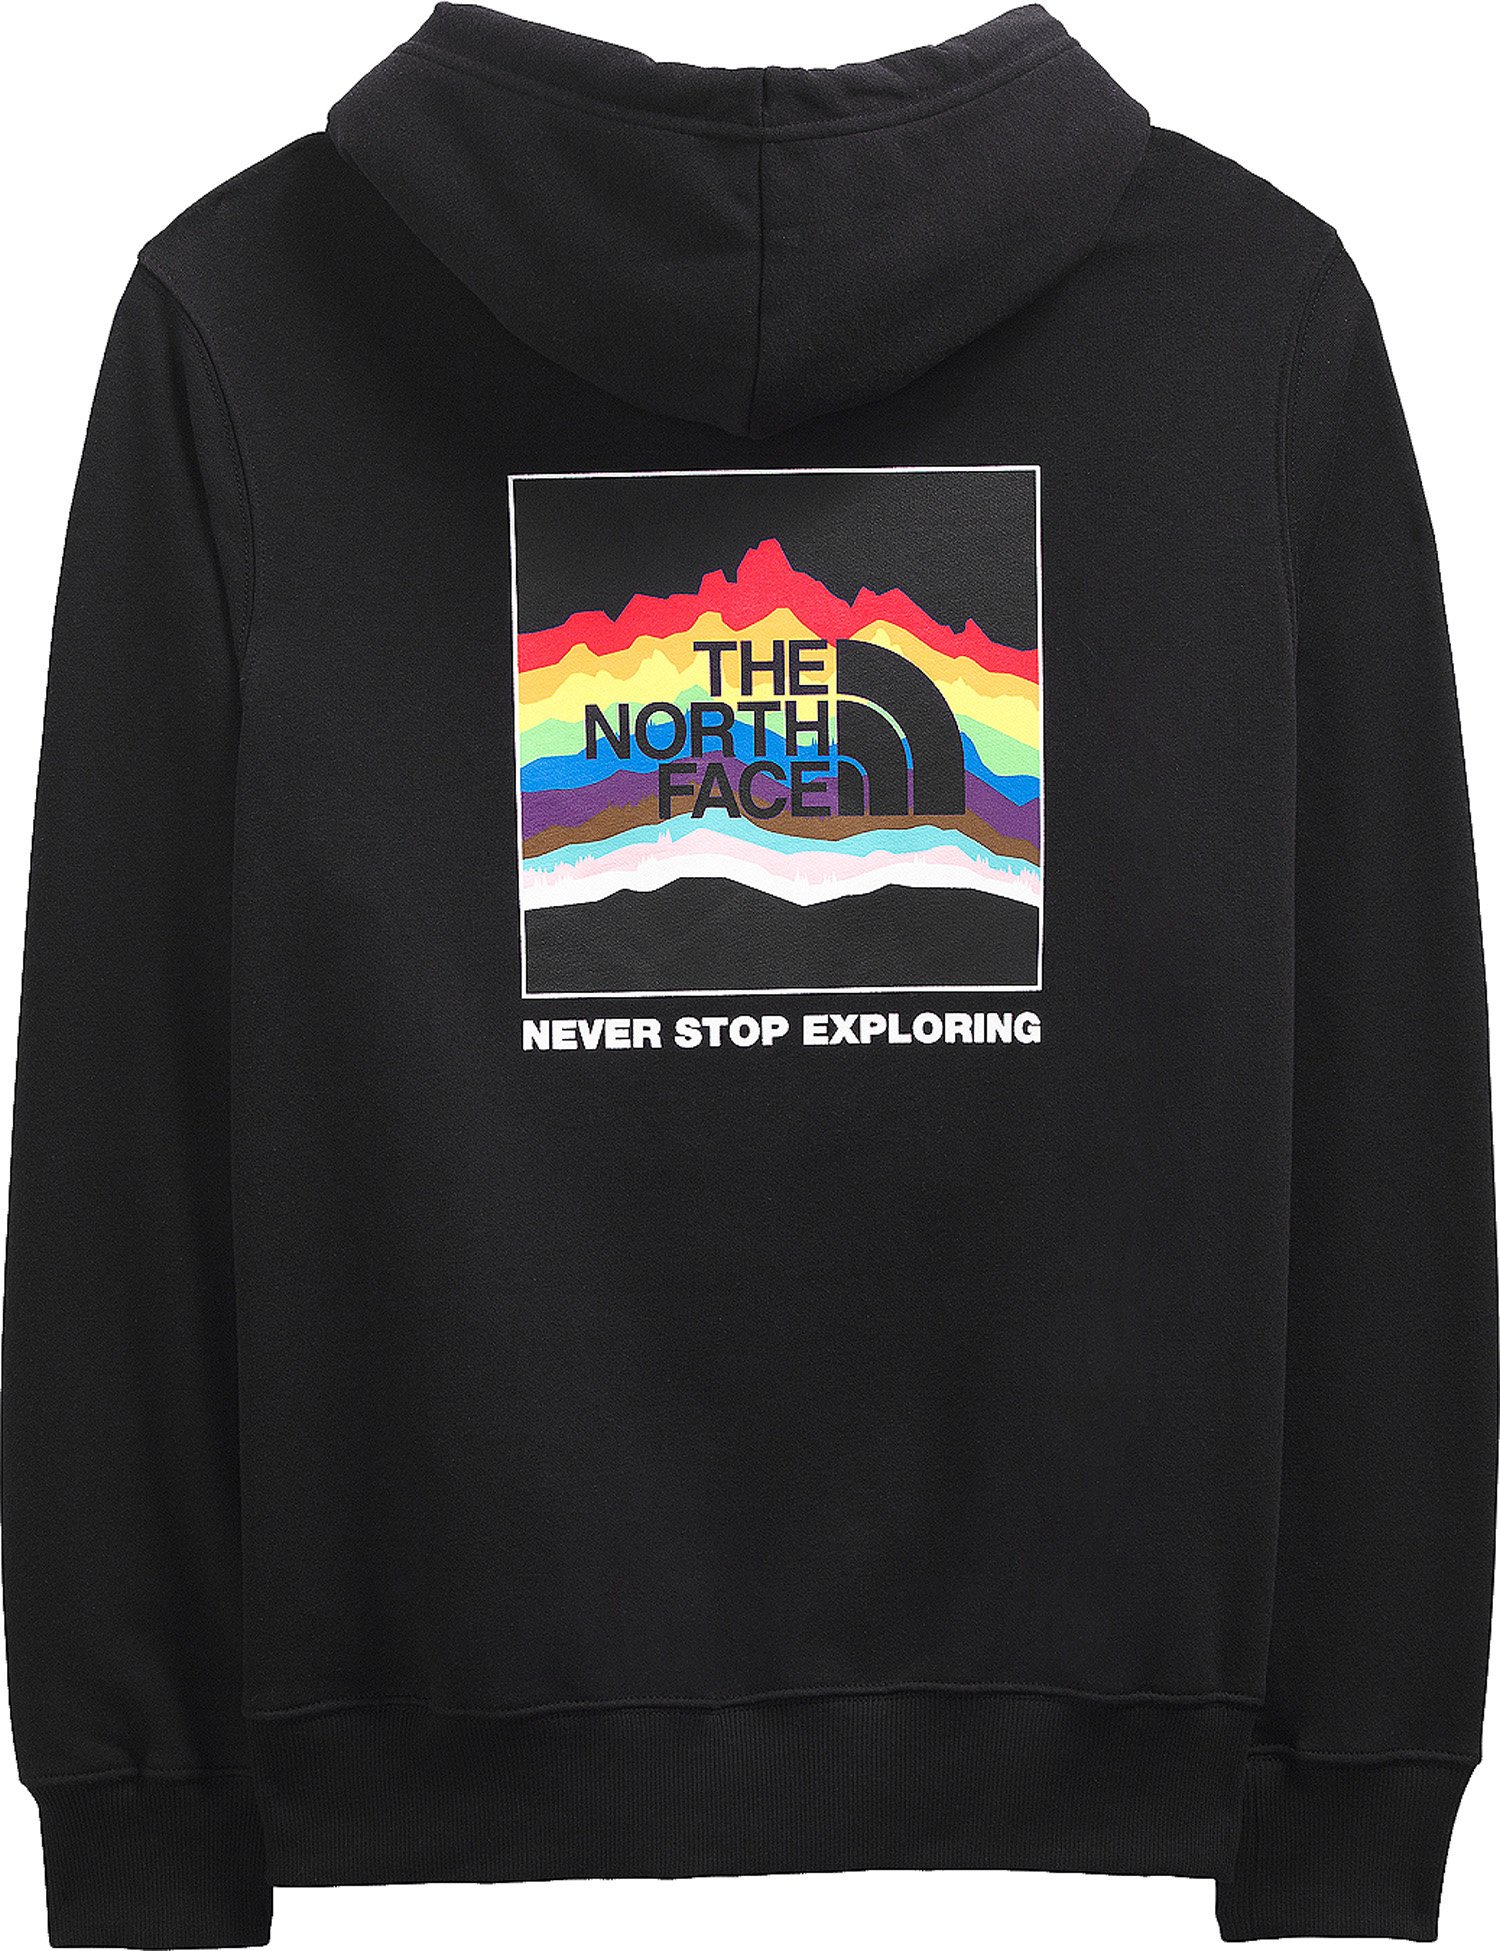 The North Face Pride Pullover Hoodie - Men's